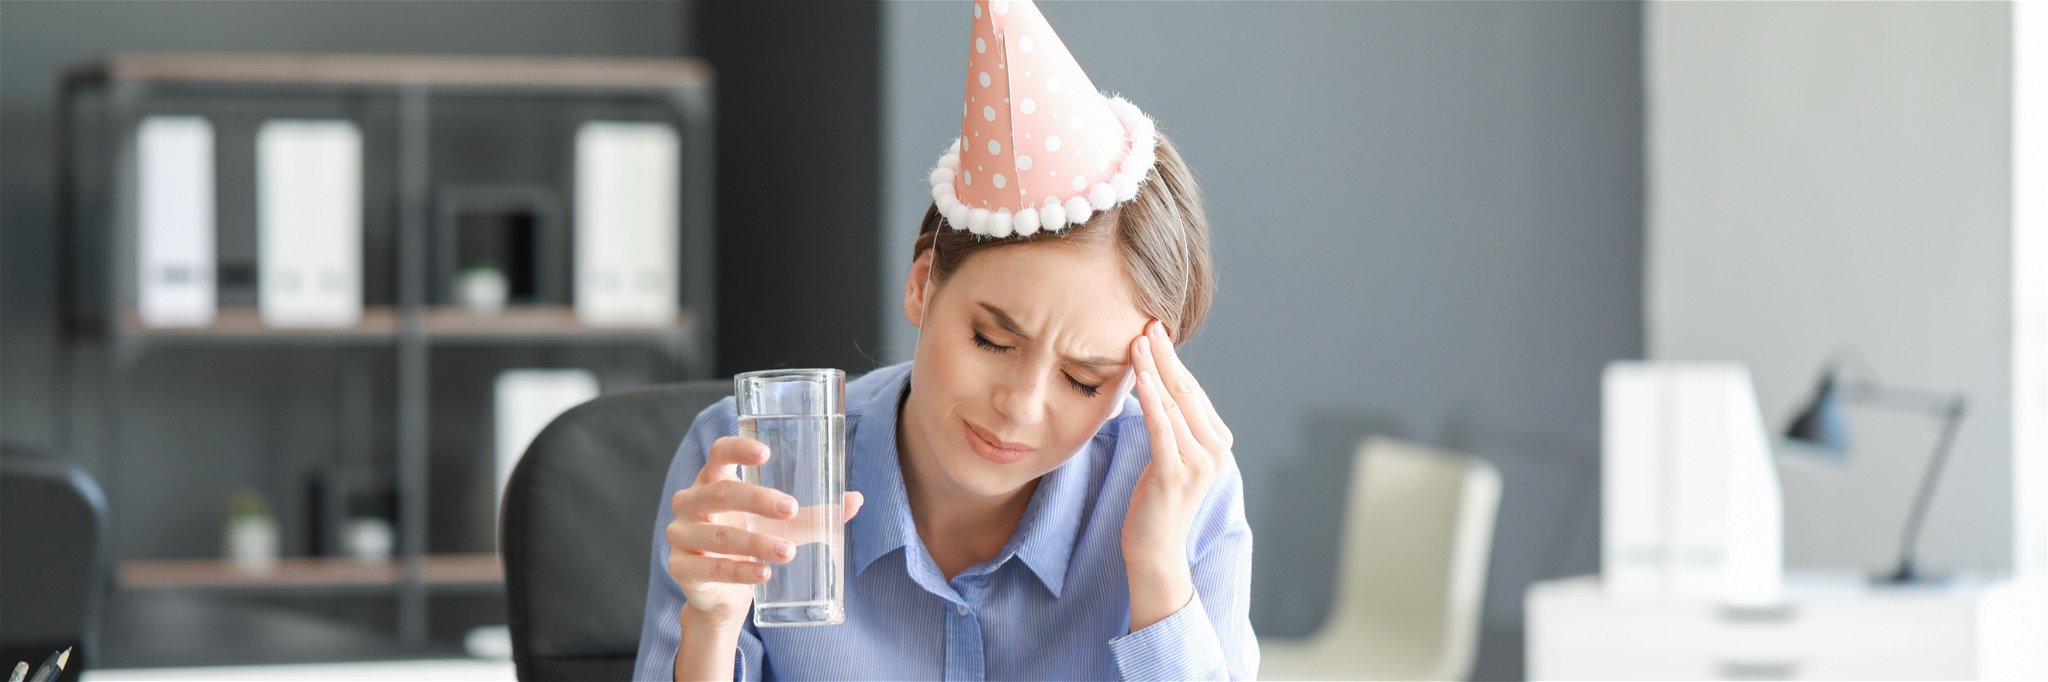 UK researchers have bad news for those hoping for a quick hangover fix.